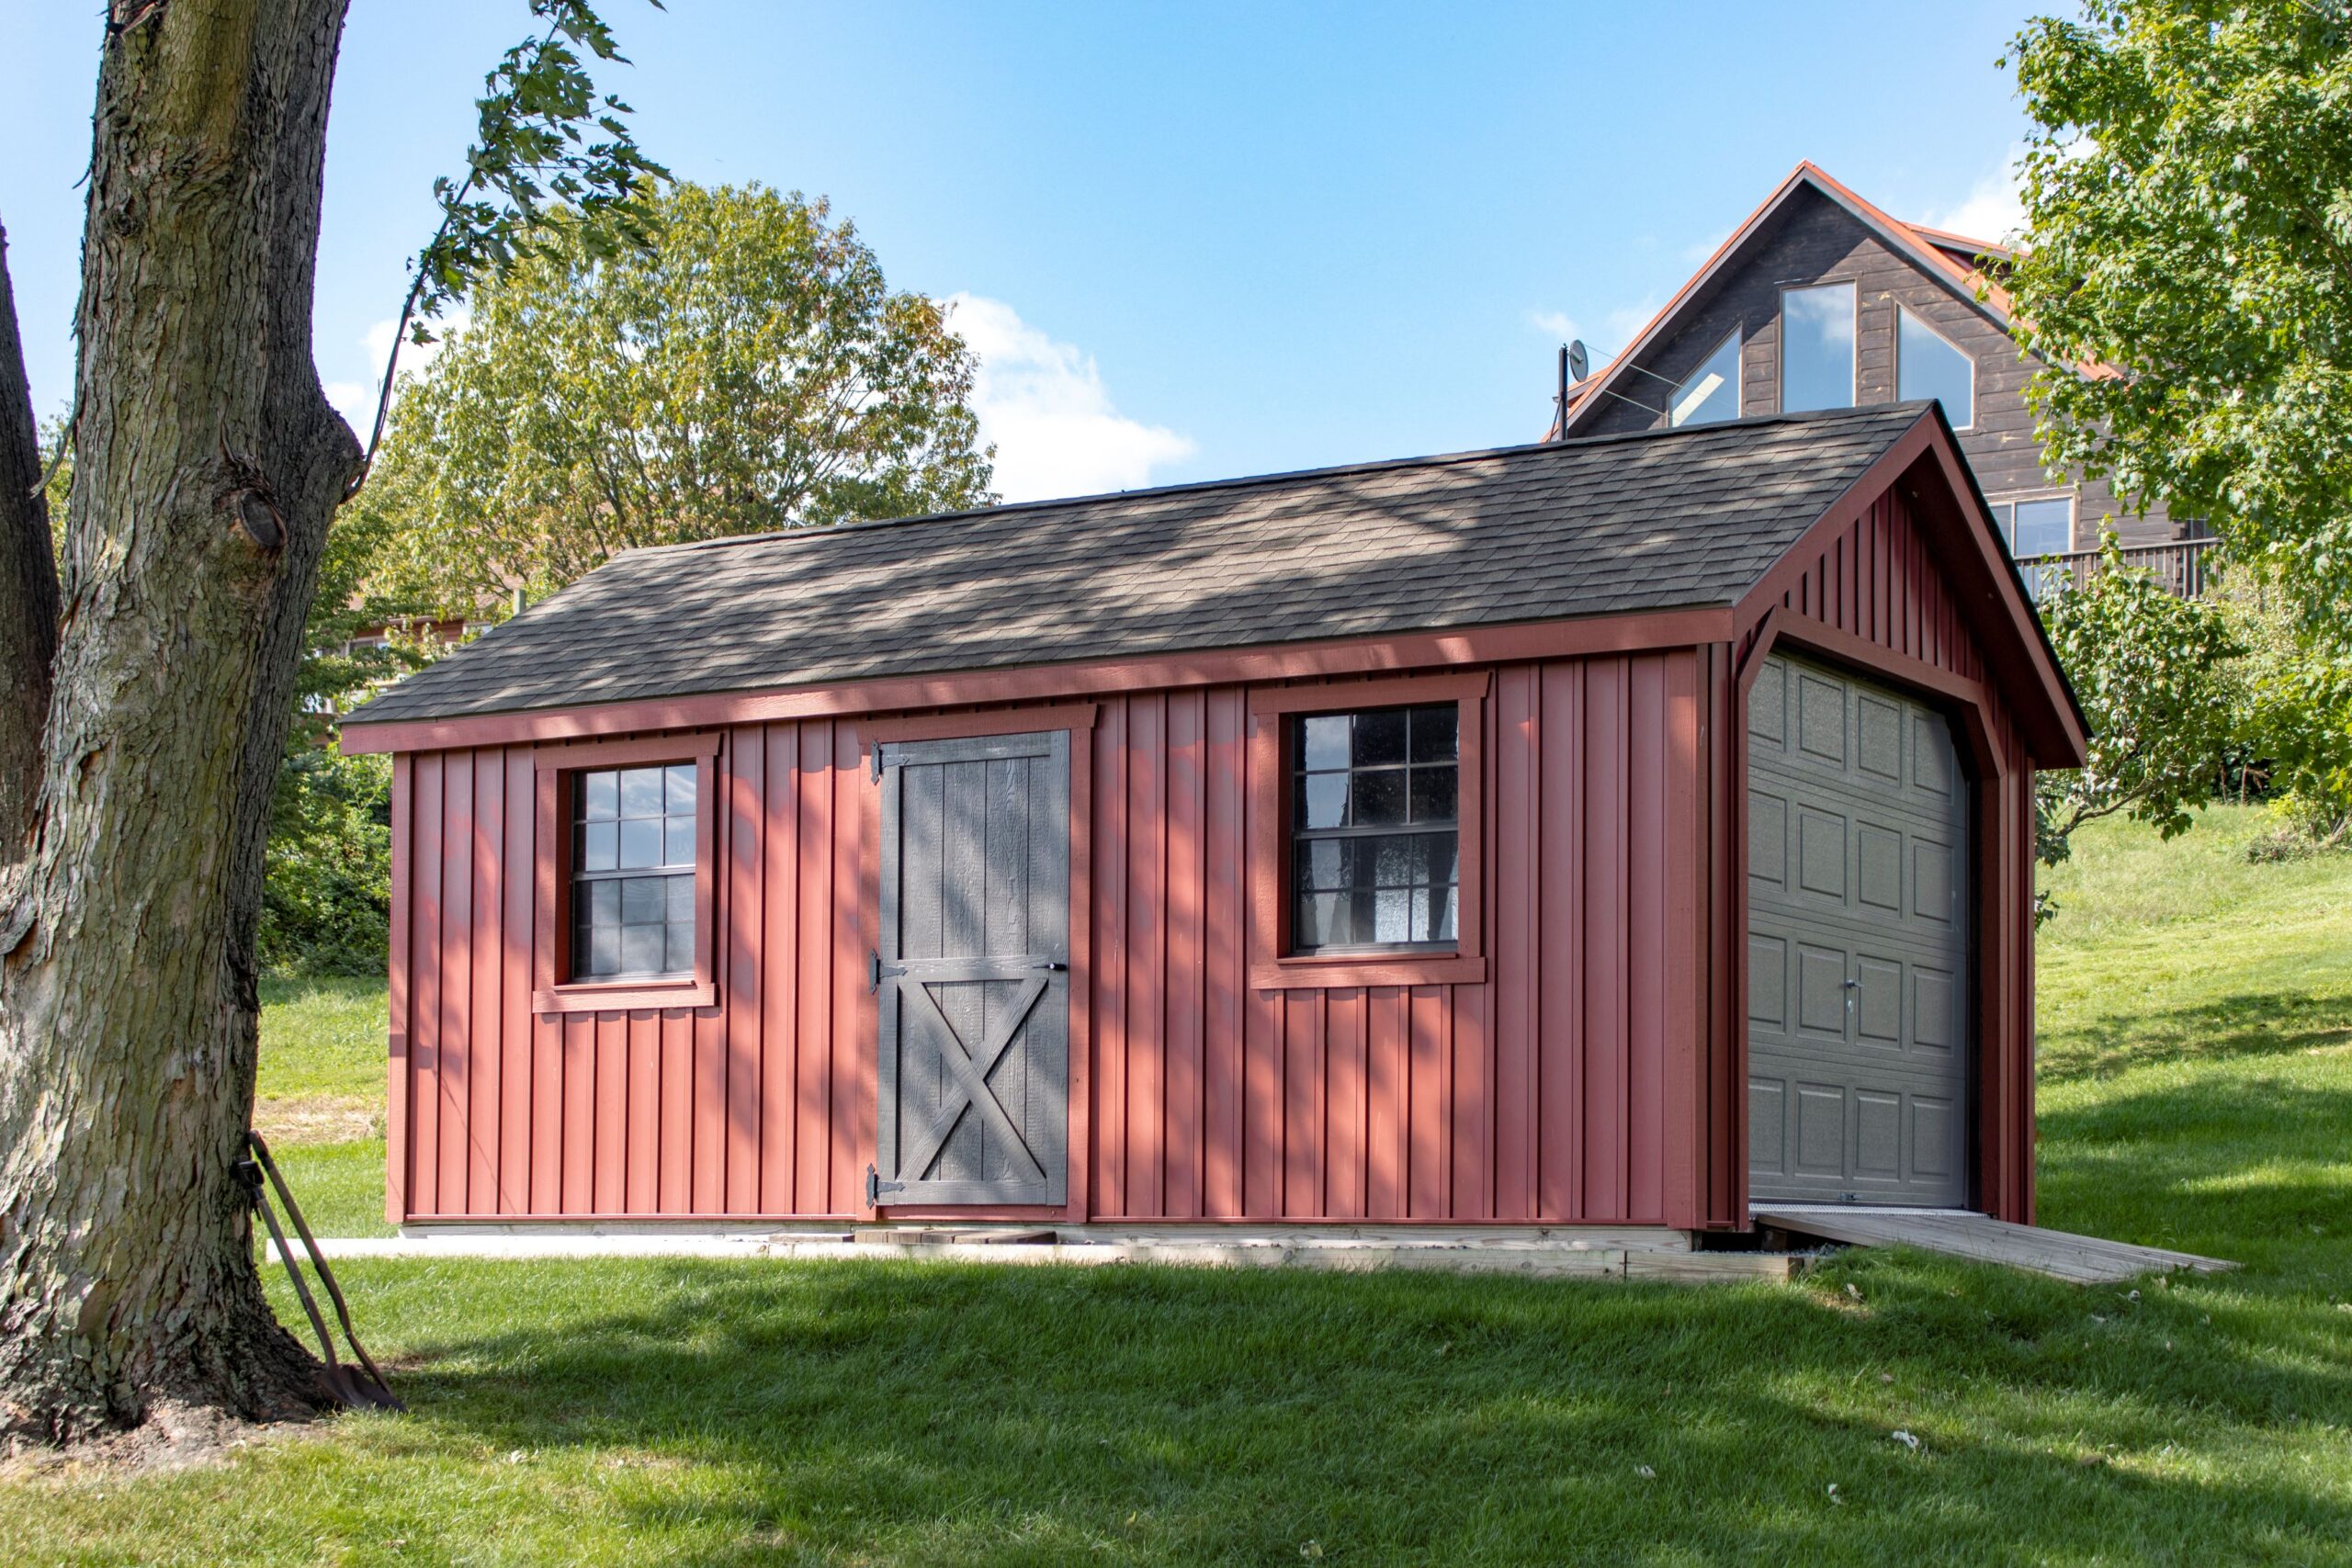 Exterior of a 1-story, 1-car Garden Shed Garage with red siding.